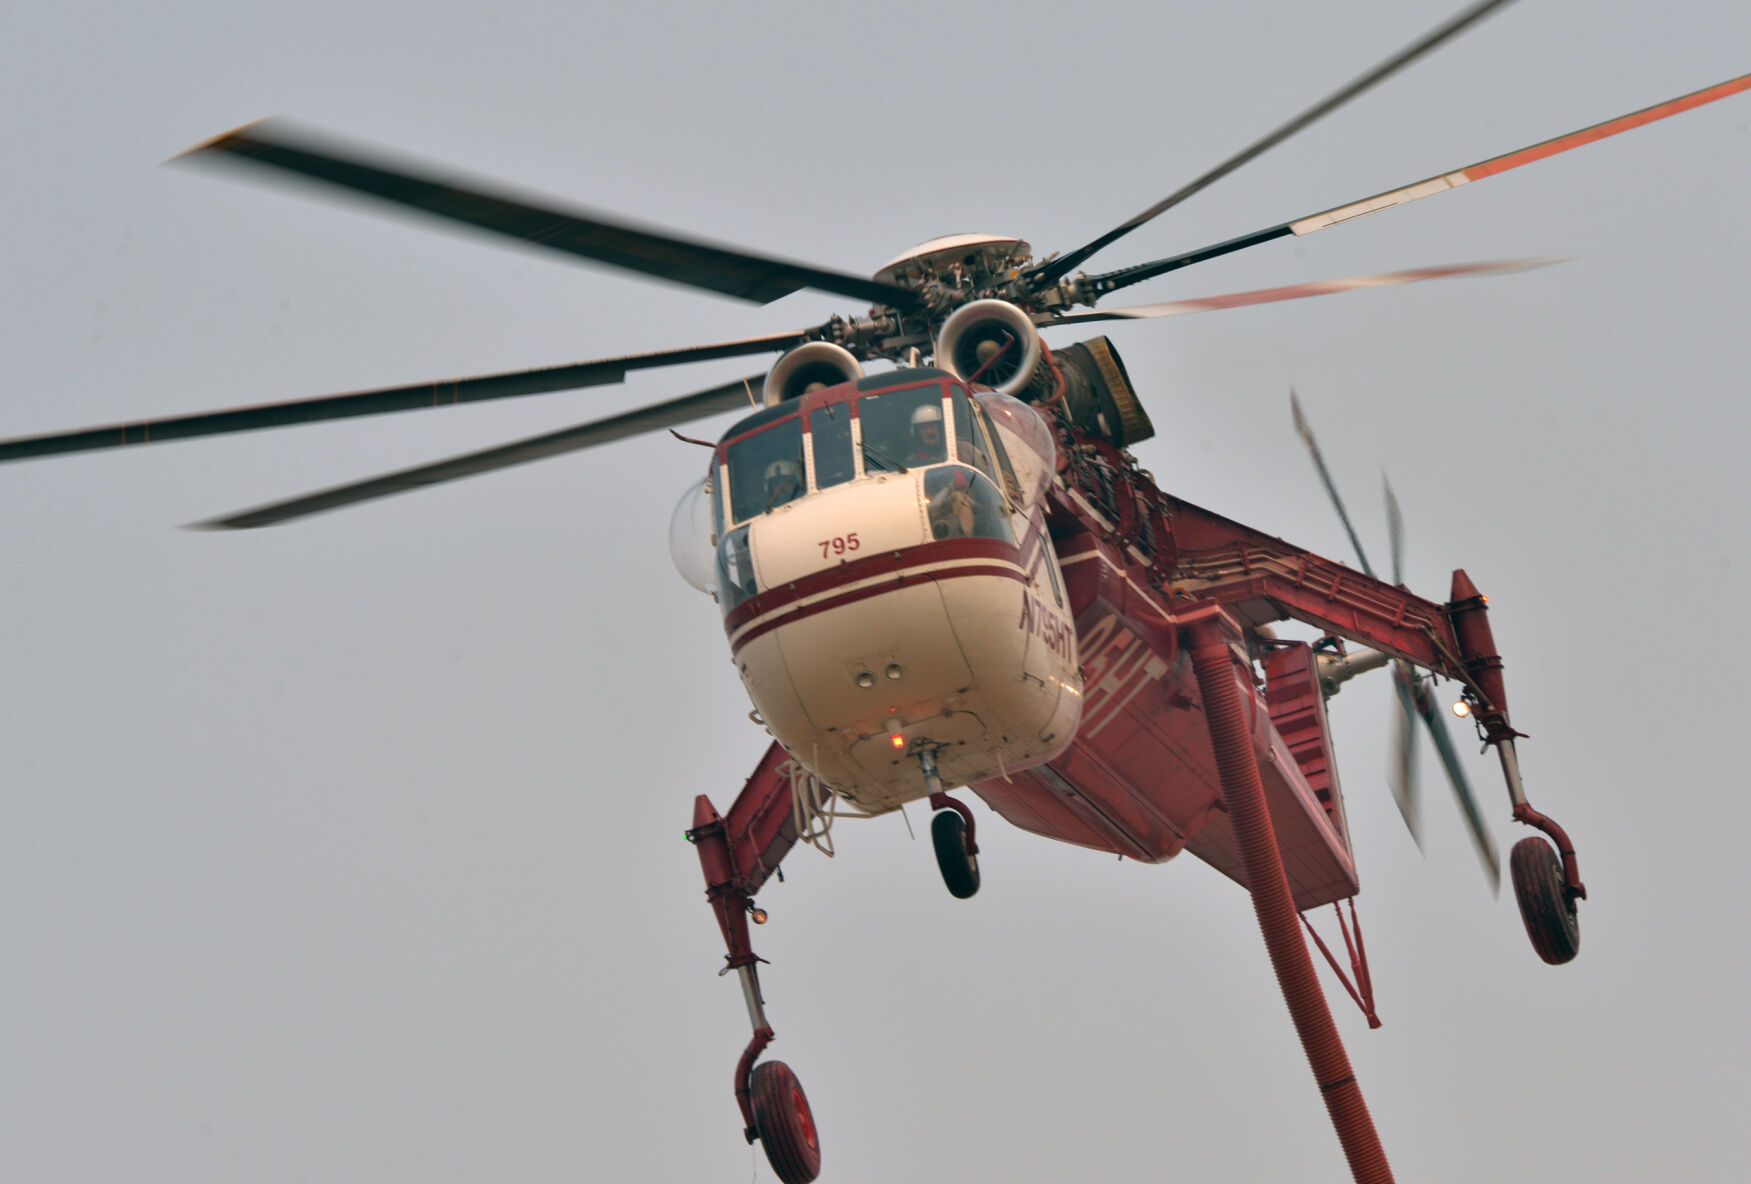 cal fire helicopters